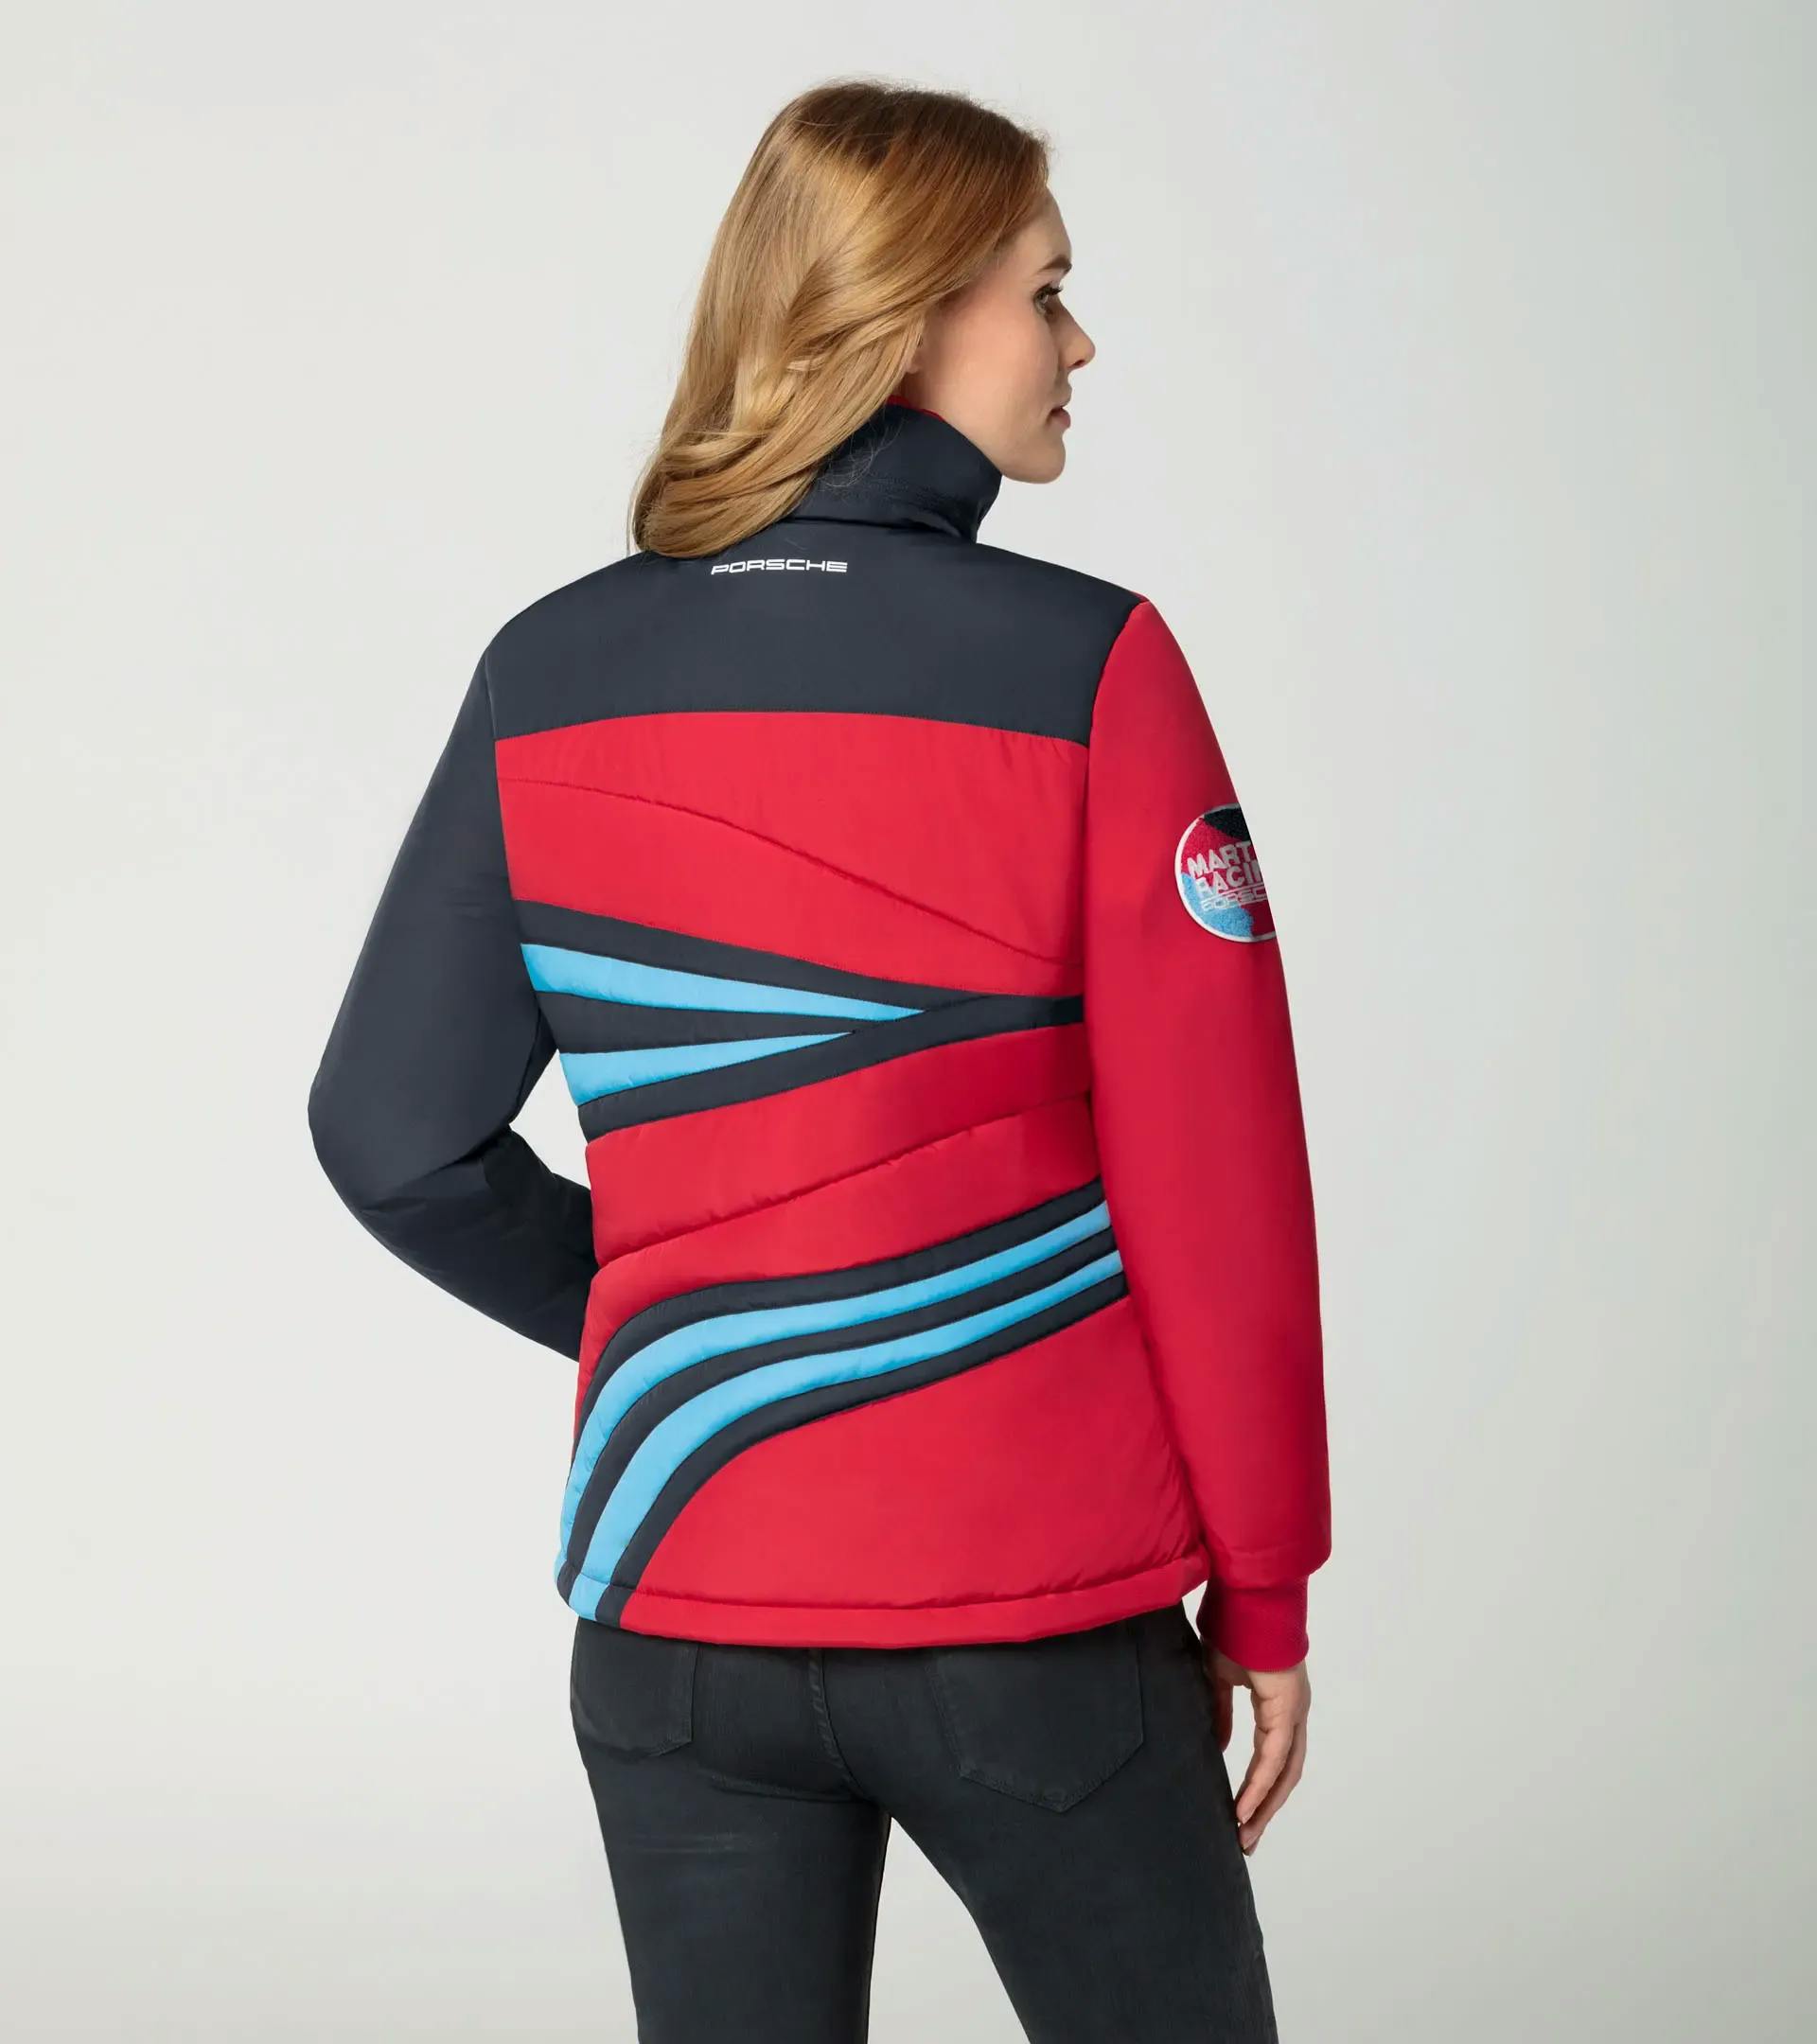 Women's quilted jacket – MARTINI RACING® 7